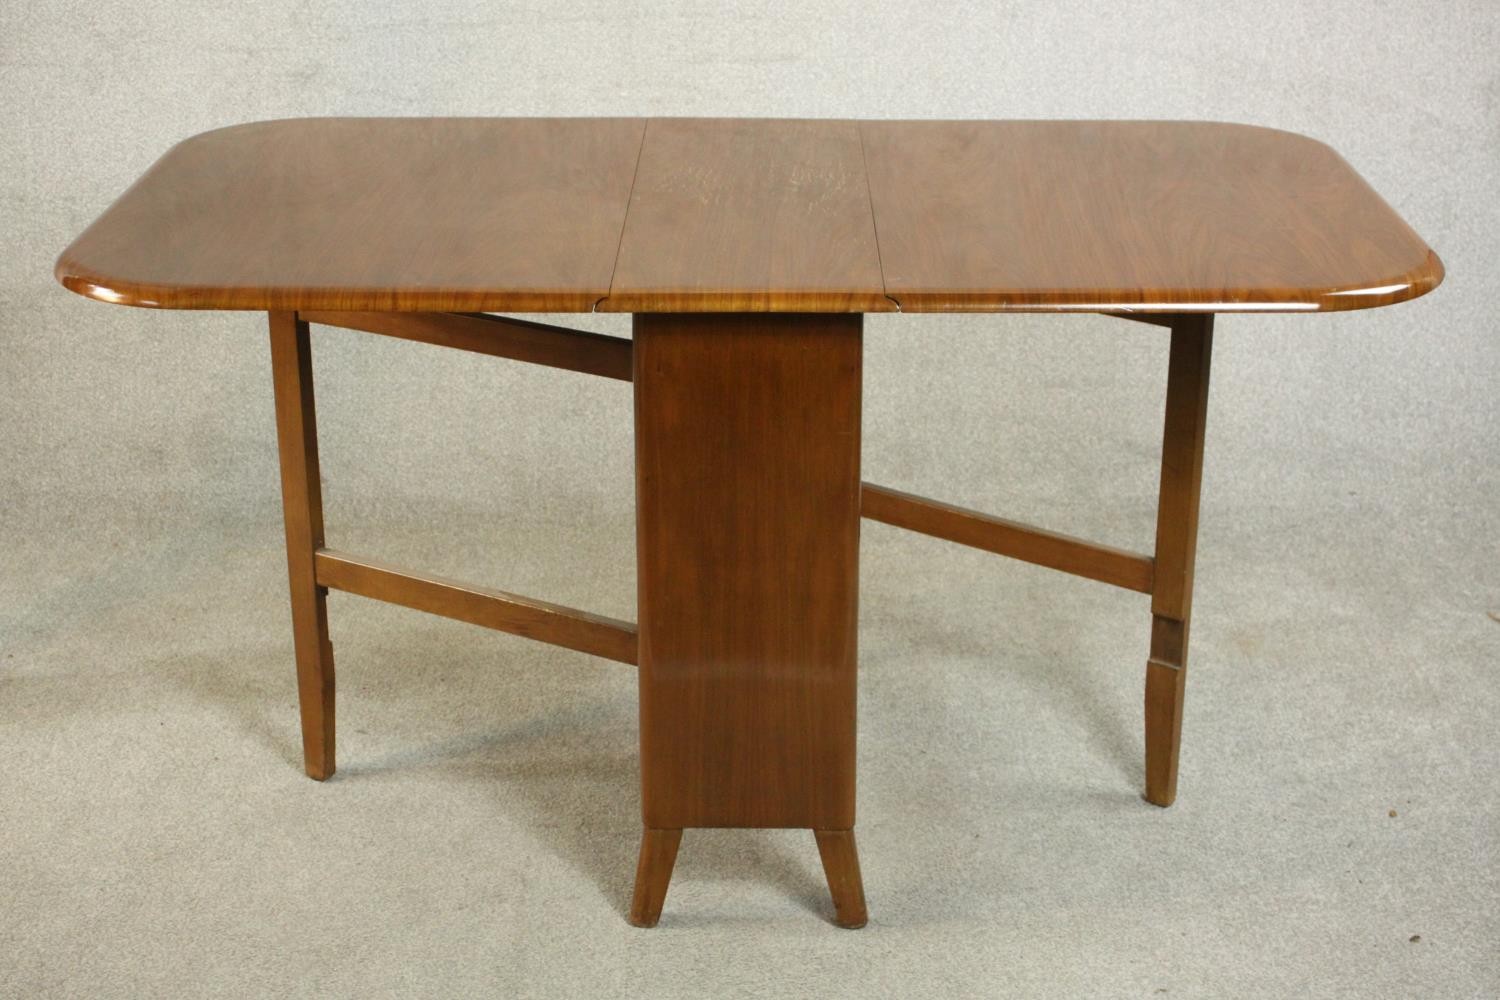 A mid 20th century walnut drop leaf dining table, the two leaves with rounded corners on a base with